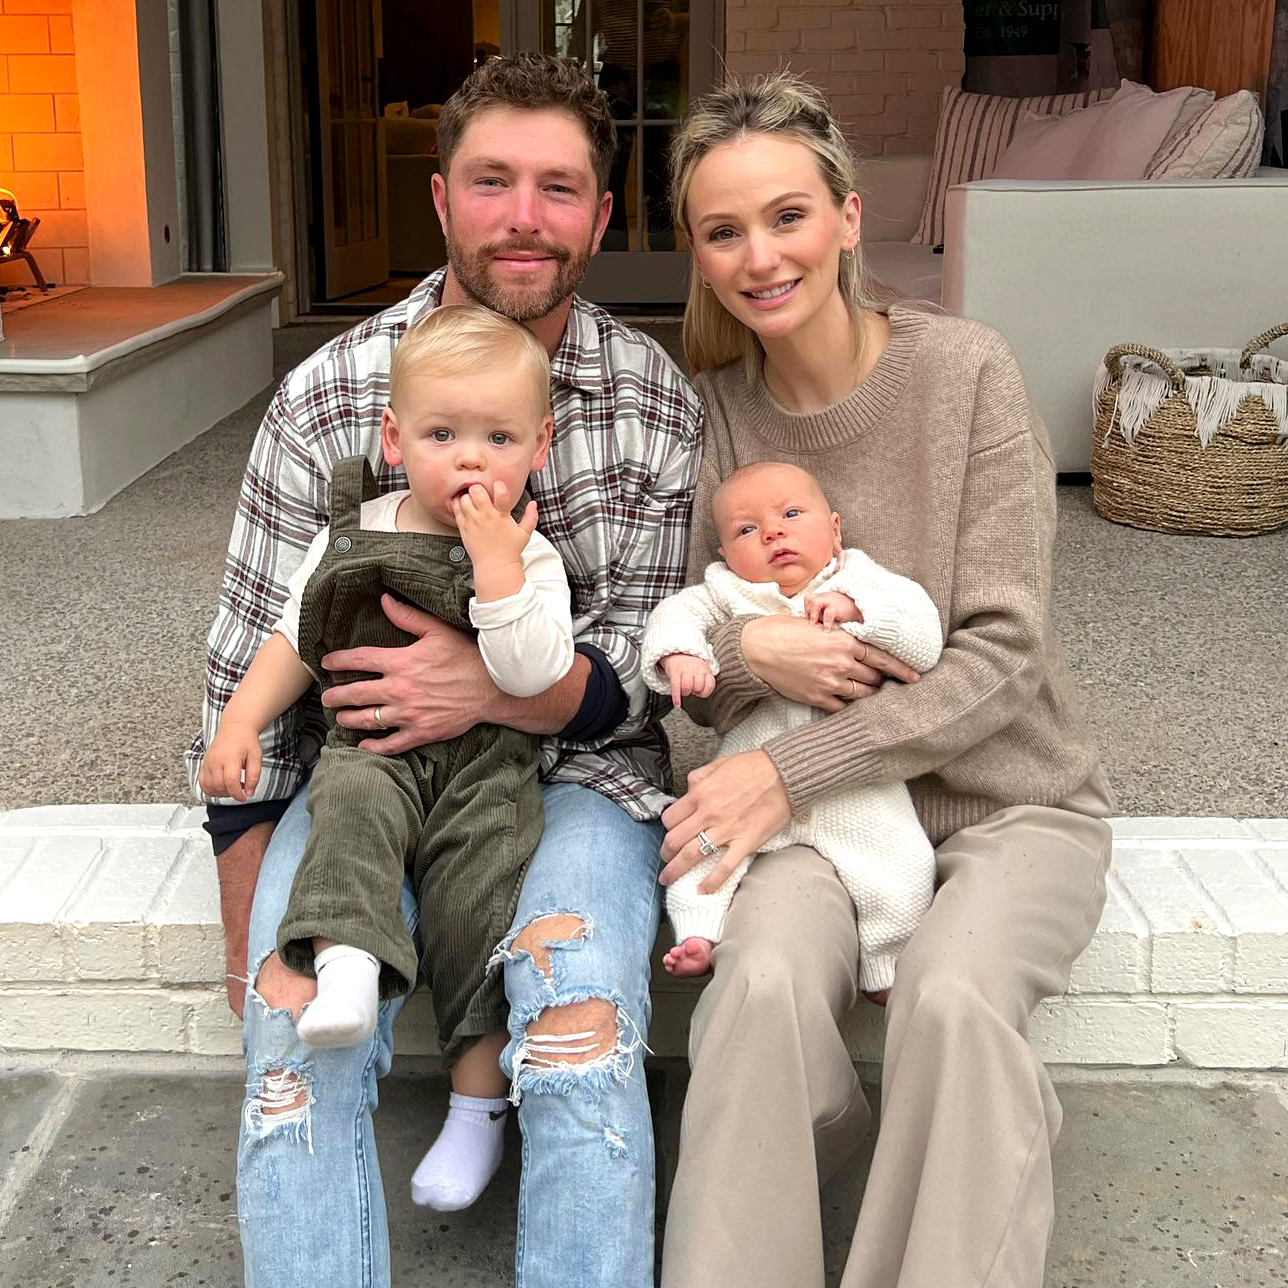 Bachelor’s Lauren Bushnell and Chris Lane’s Sweetest Family Moments With Sons Dutton and Baker